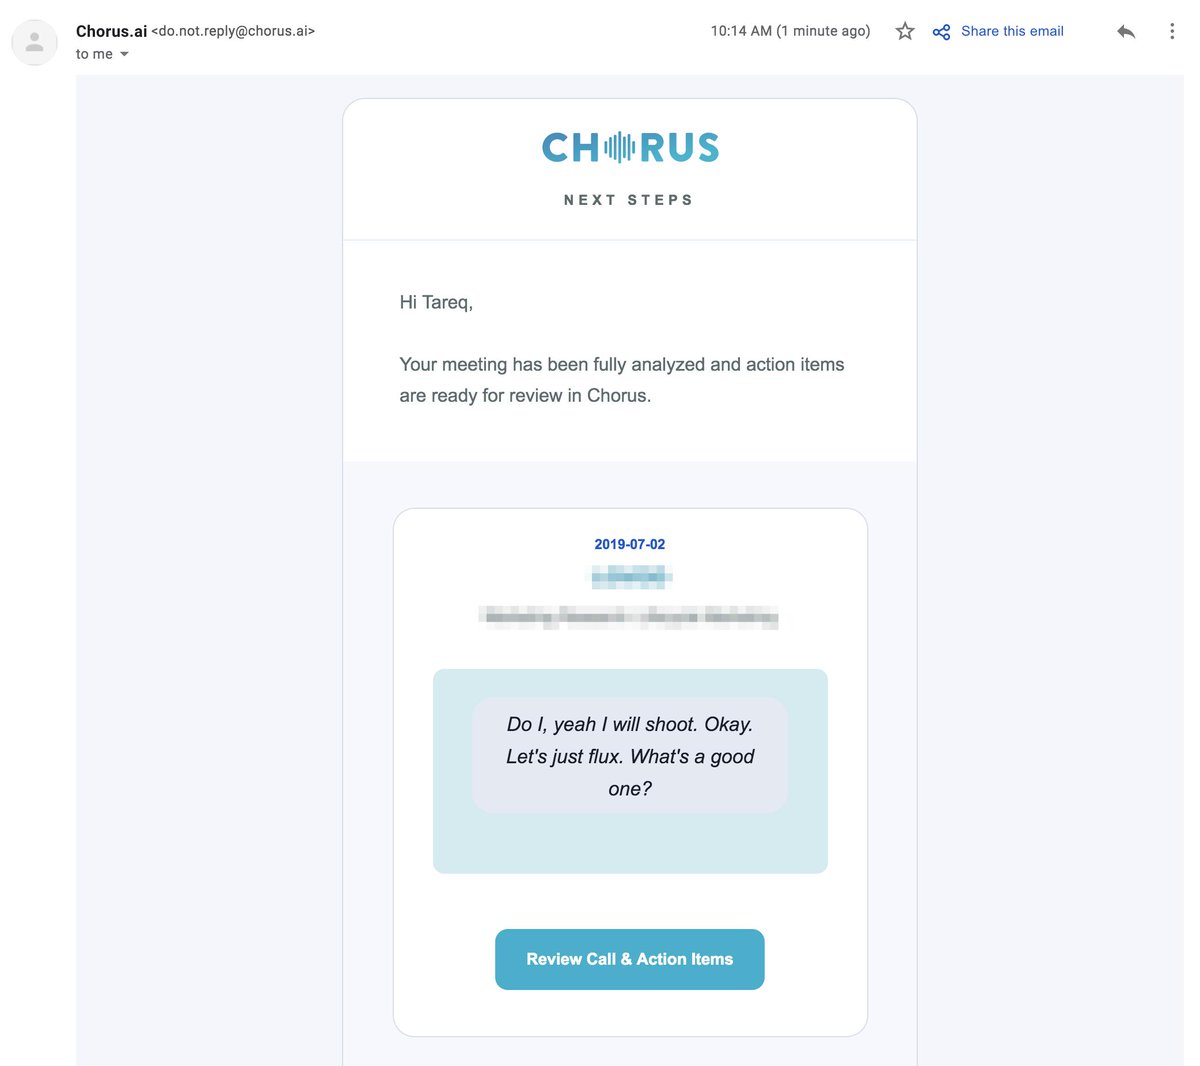  #delightful_design_details 4Don't gamble with delight by playing the odds. http://Chorus.ai  uses AI to pull insights from meetings. When it works, it's super delightful! But ~70% of time it doesn't work and users remember. A big win is not worth many small losses.